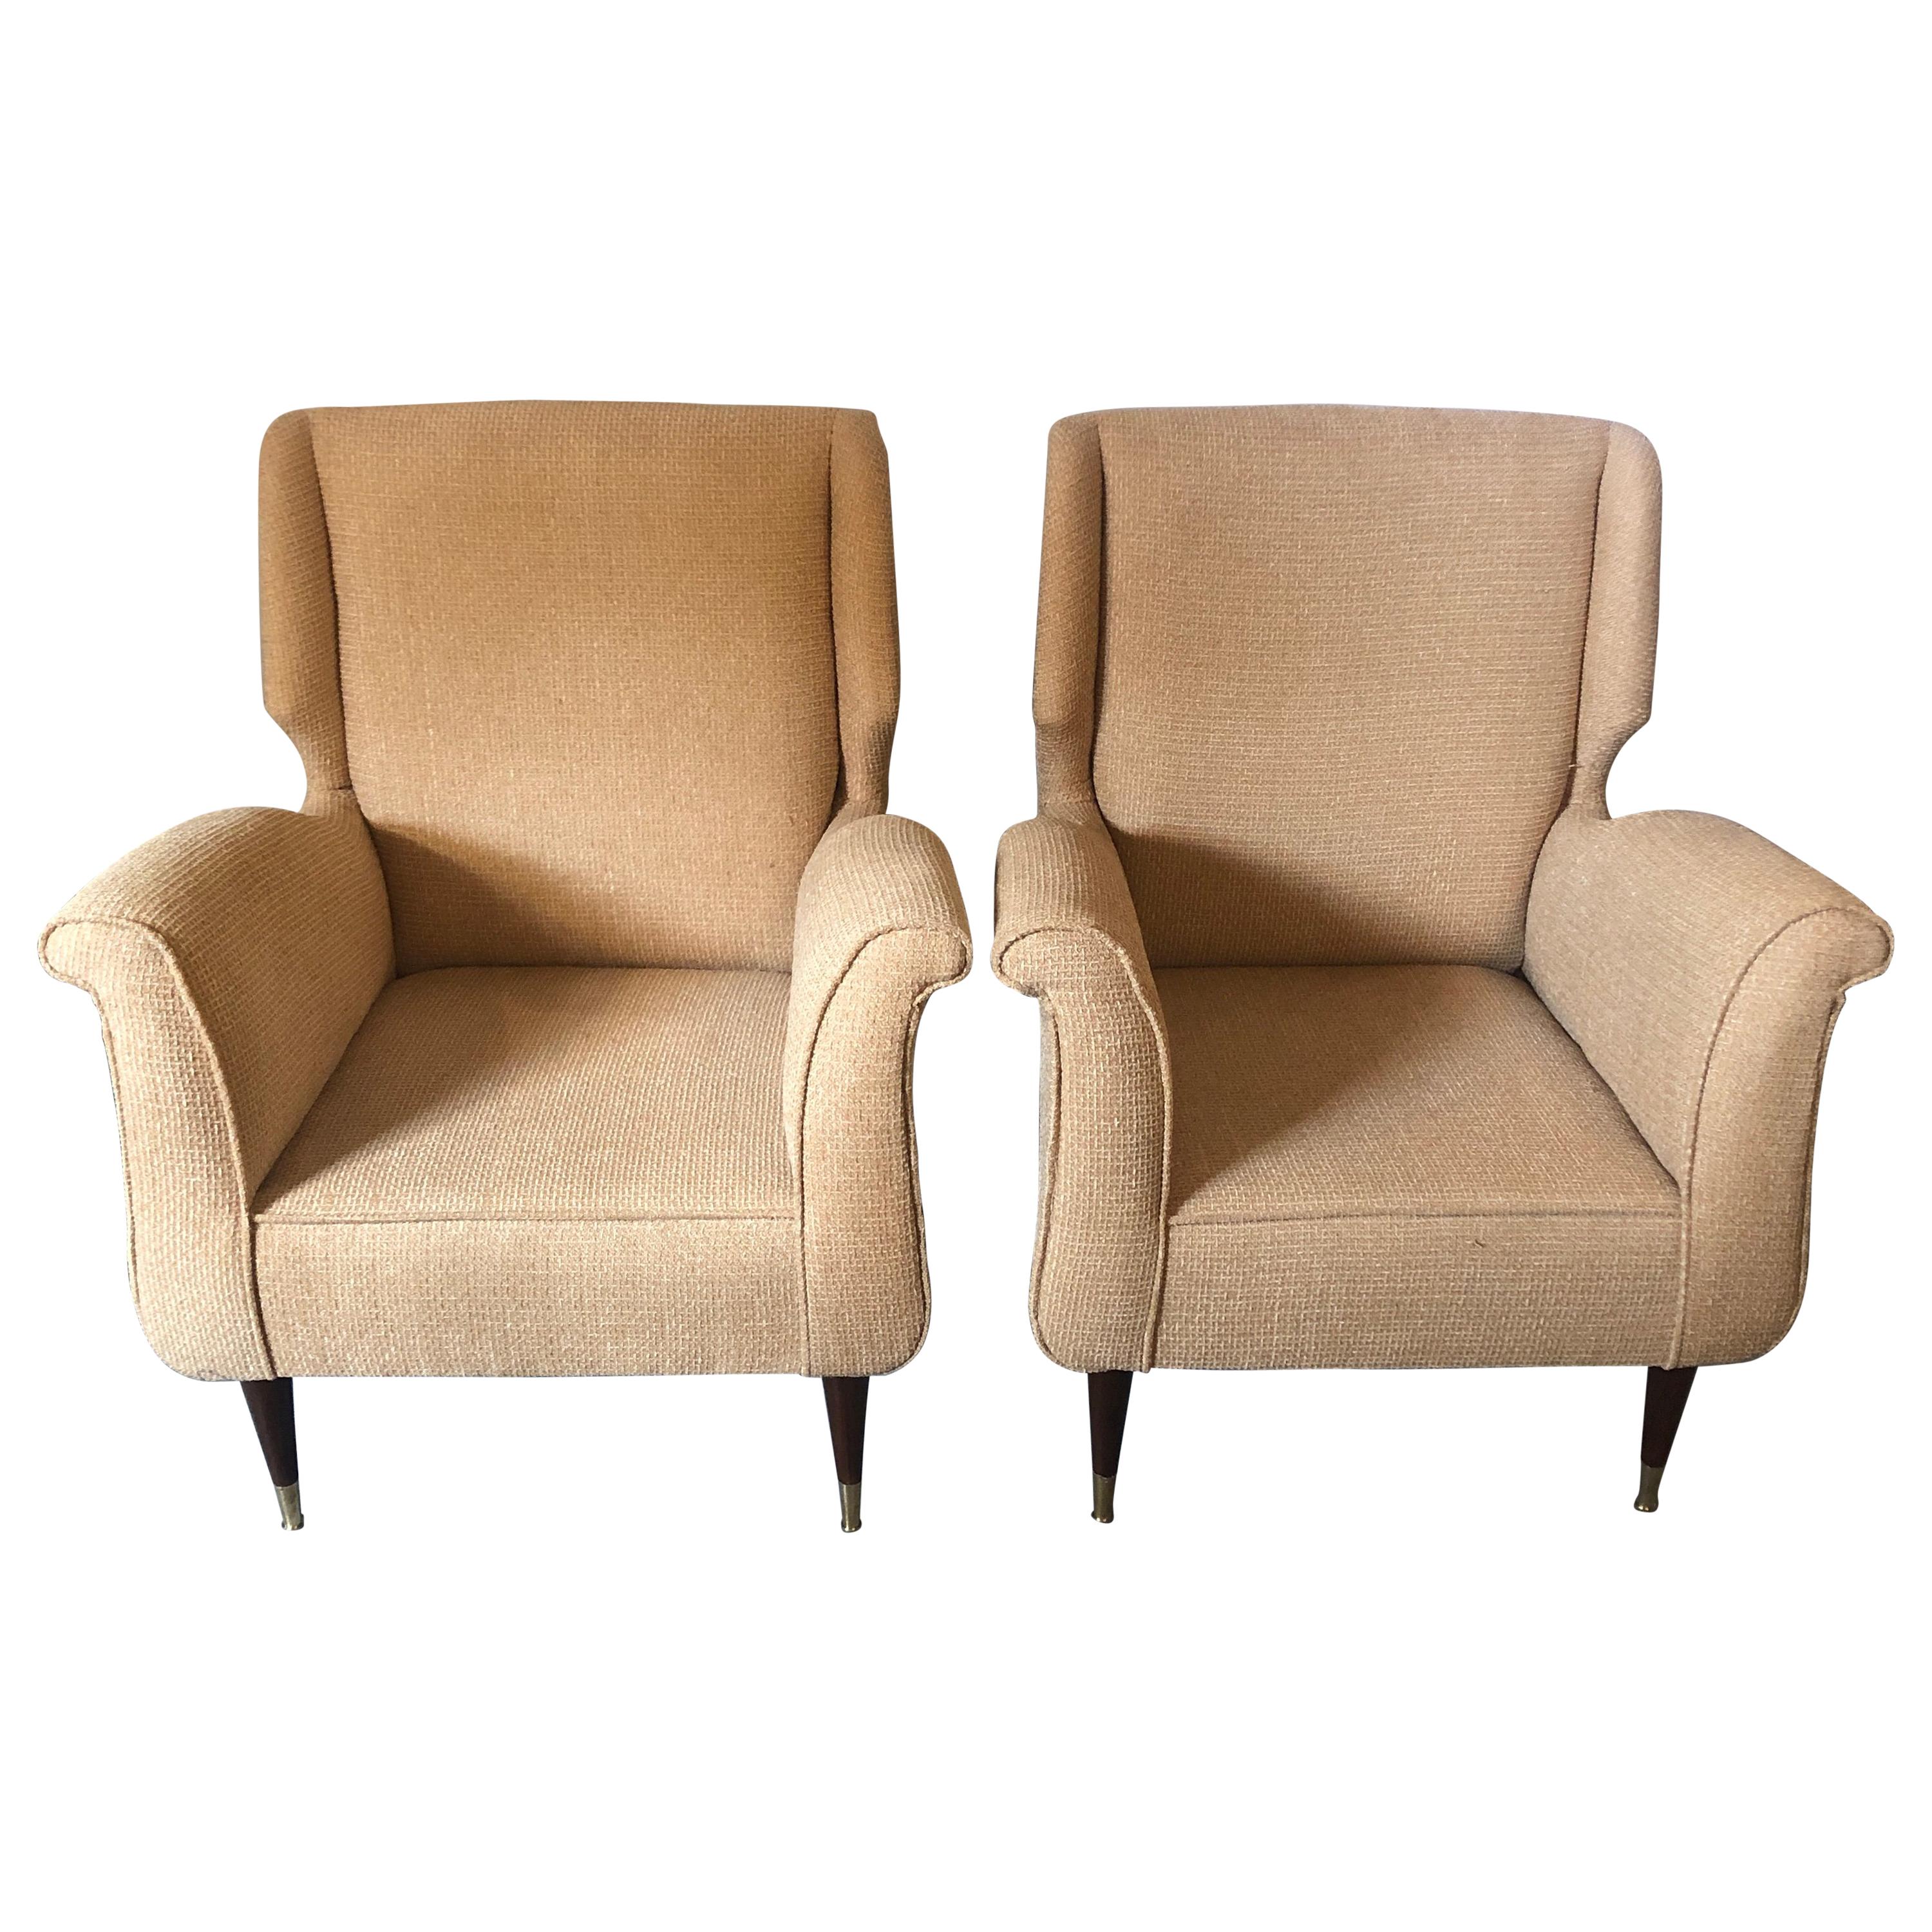 Pair of Mid-Century Modern Gio Ponti Style Arm, Bergere or Wing Back Chairs